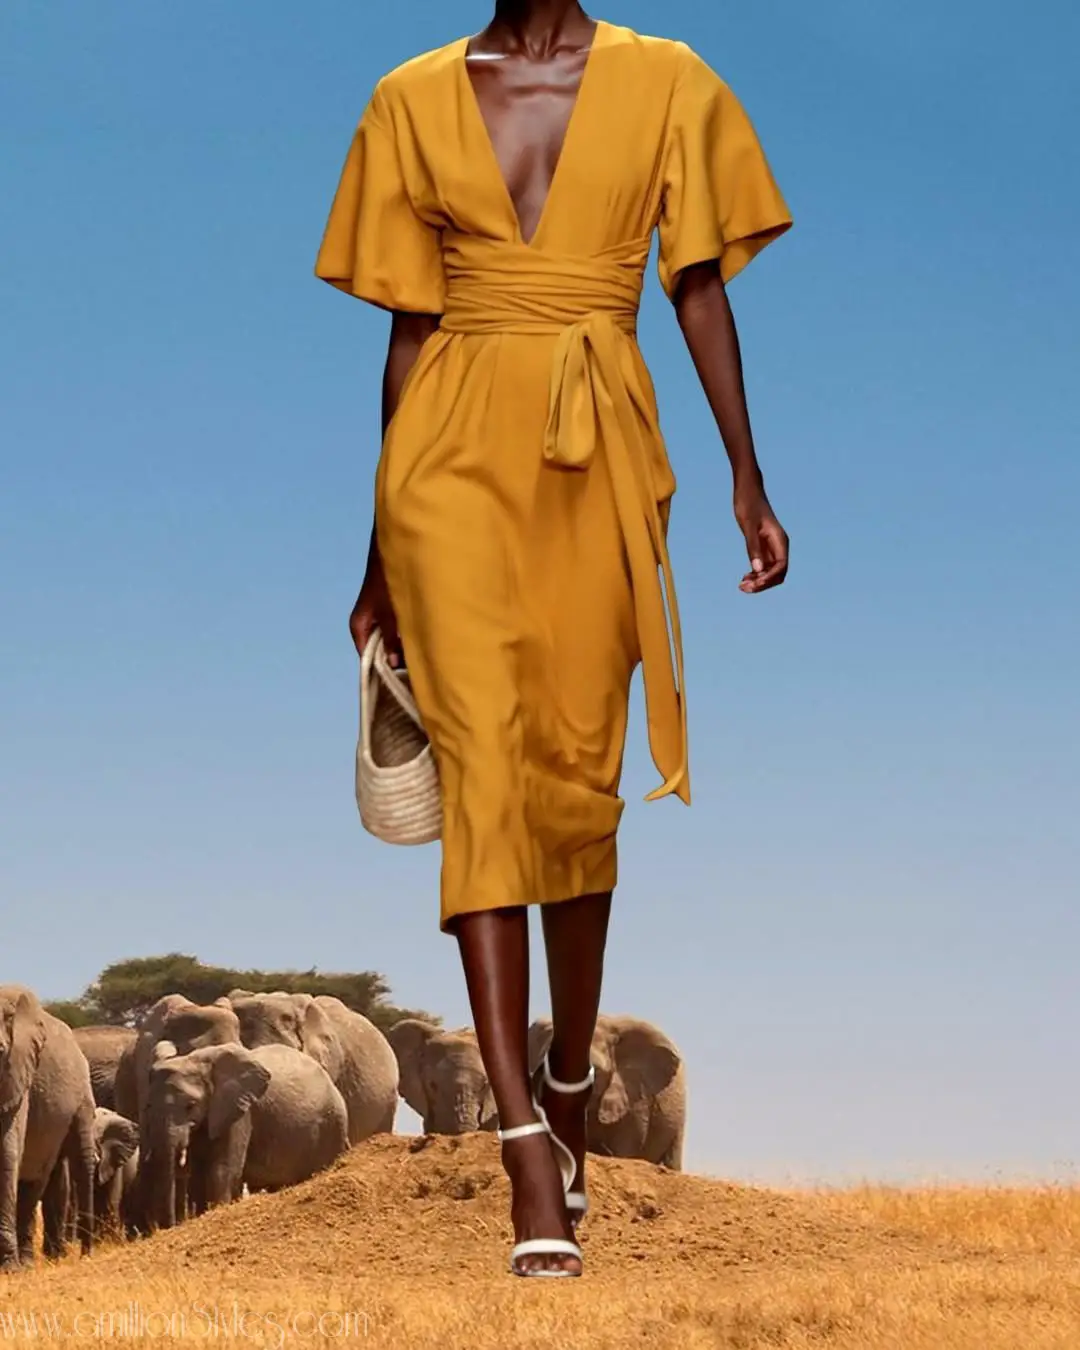 Andrea Iyamah Hits Us With The "Wild Woman" Collection For Spring/Summer 19